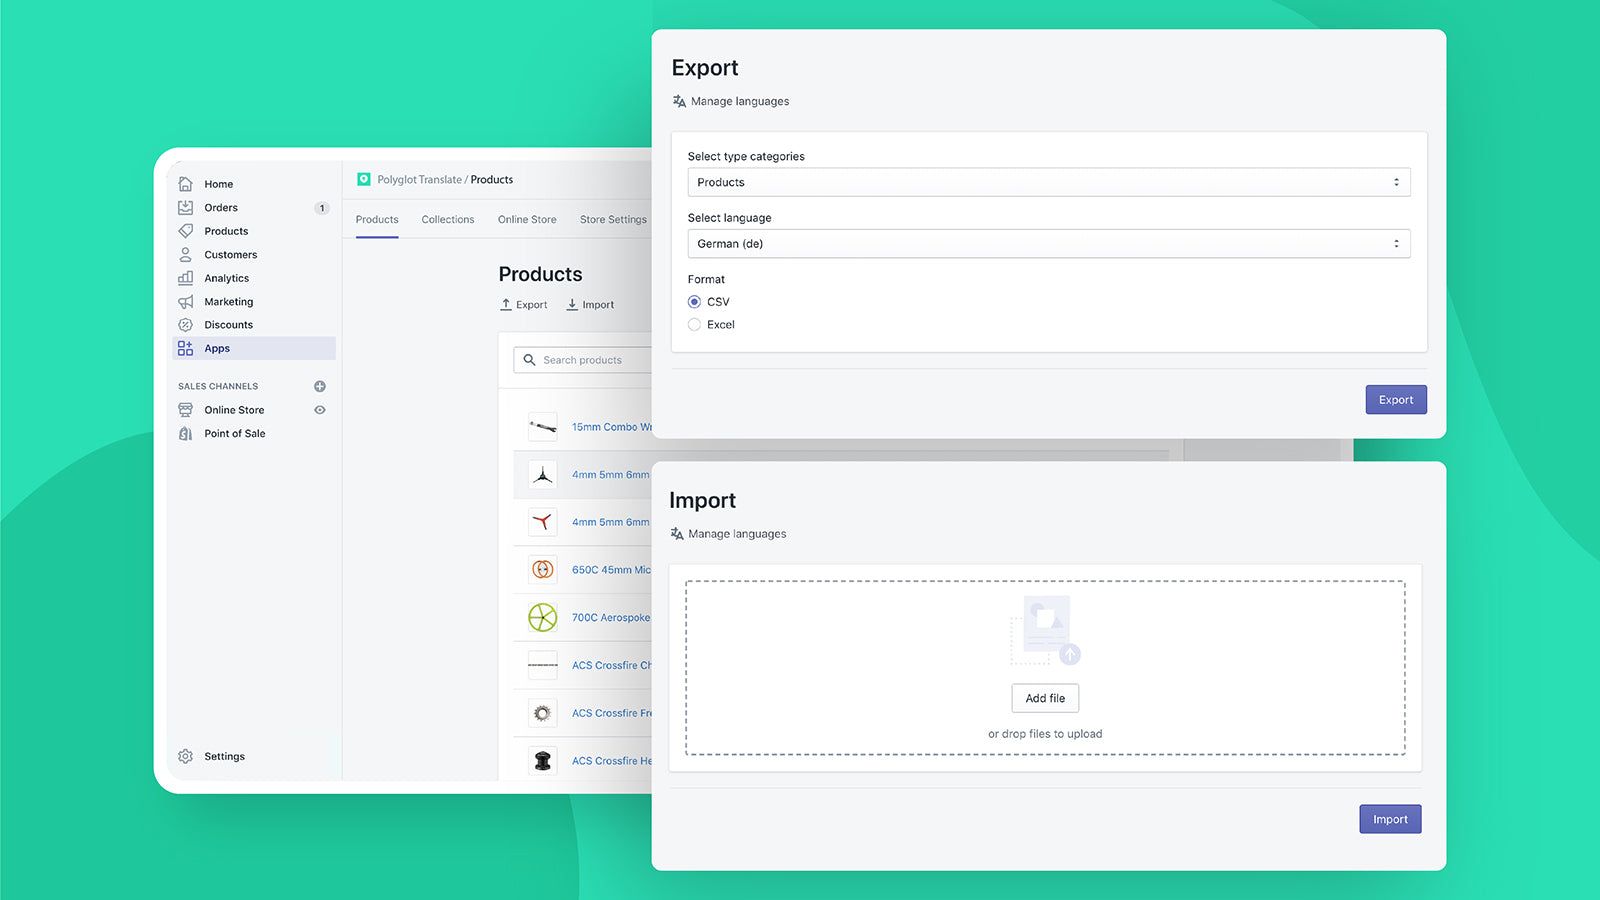 Export & import page